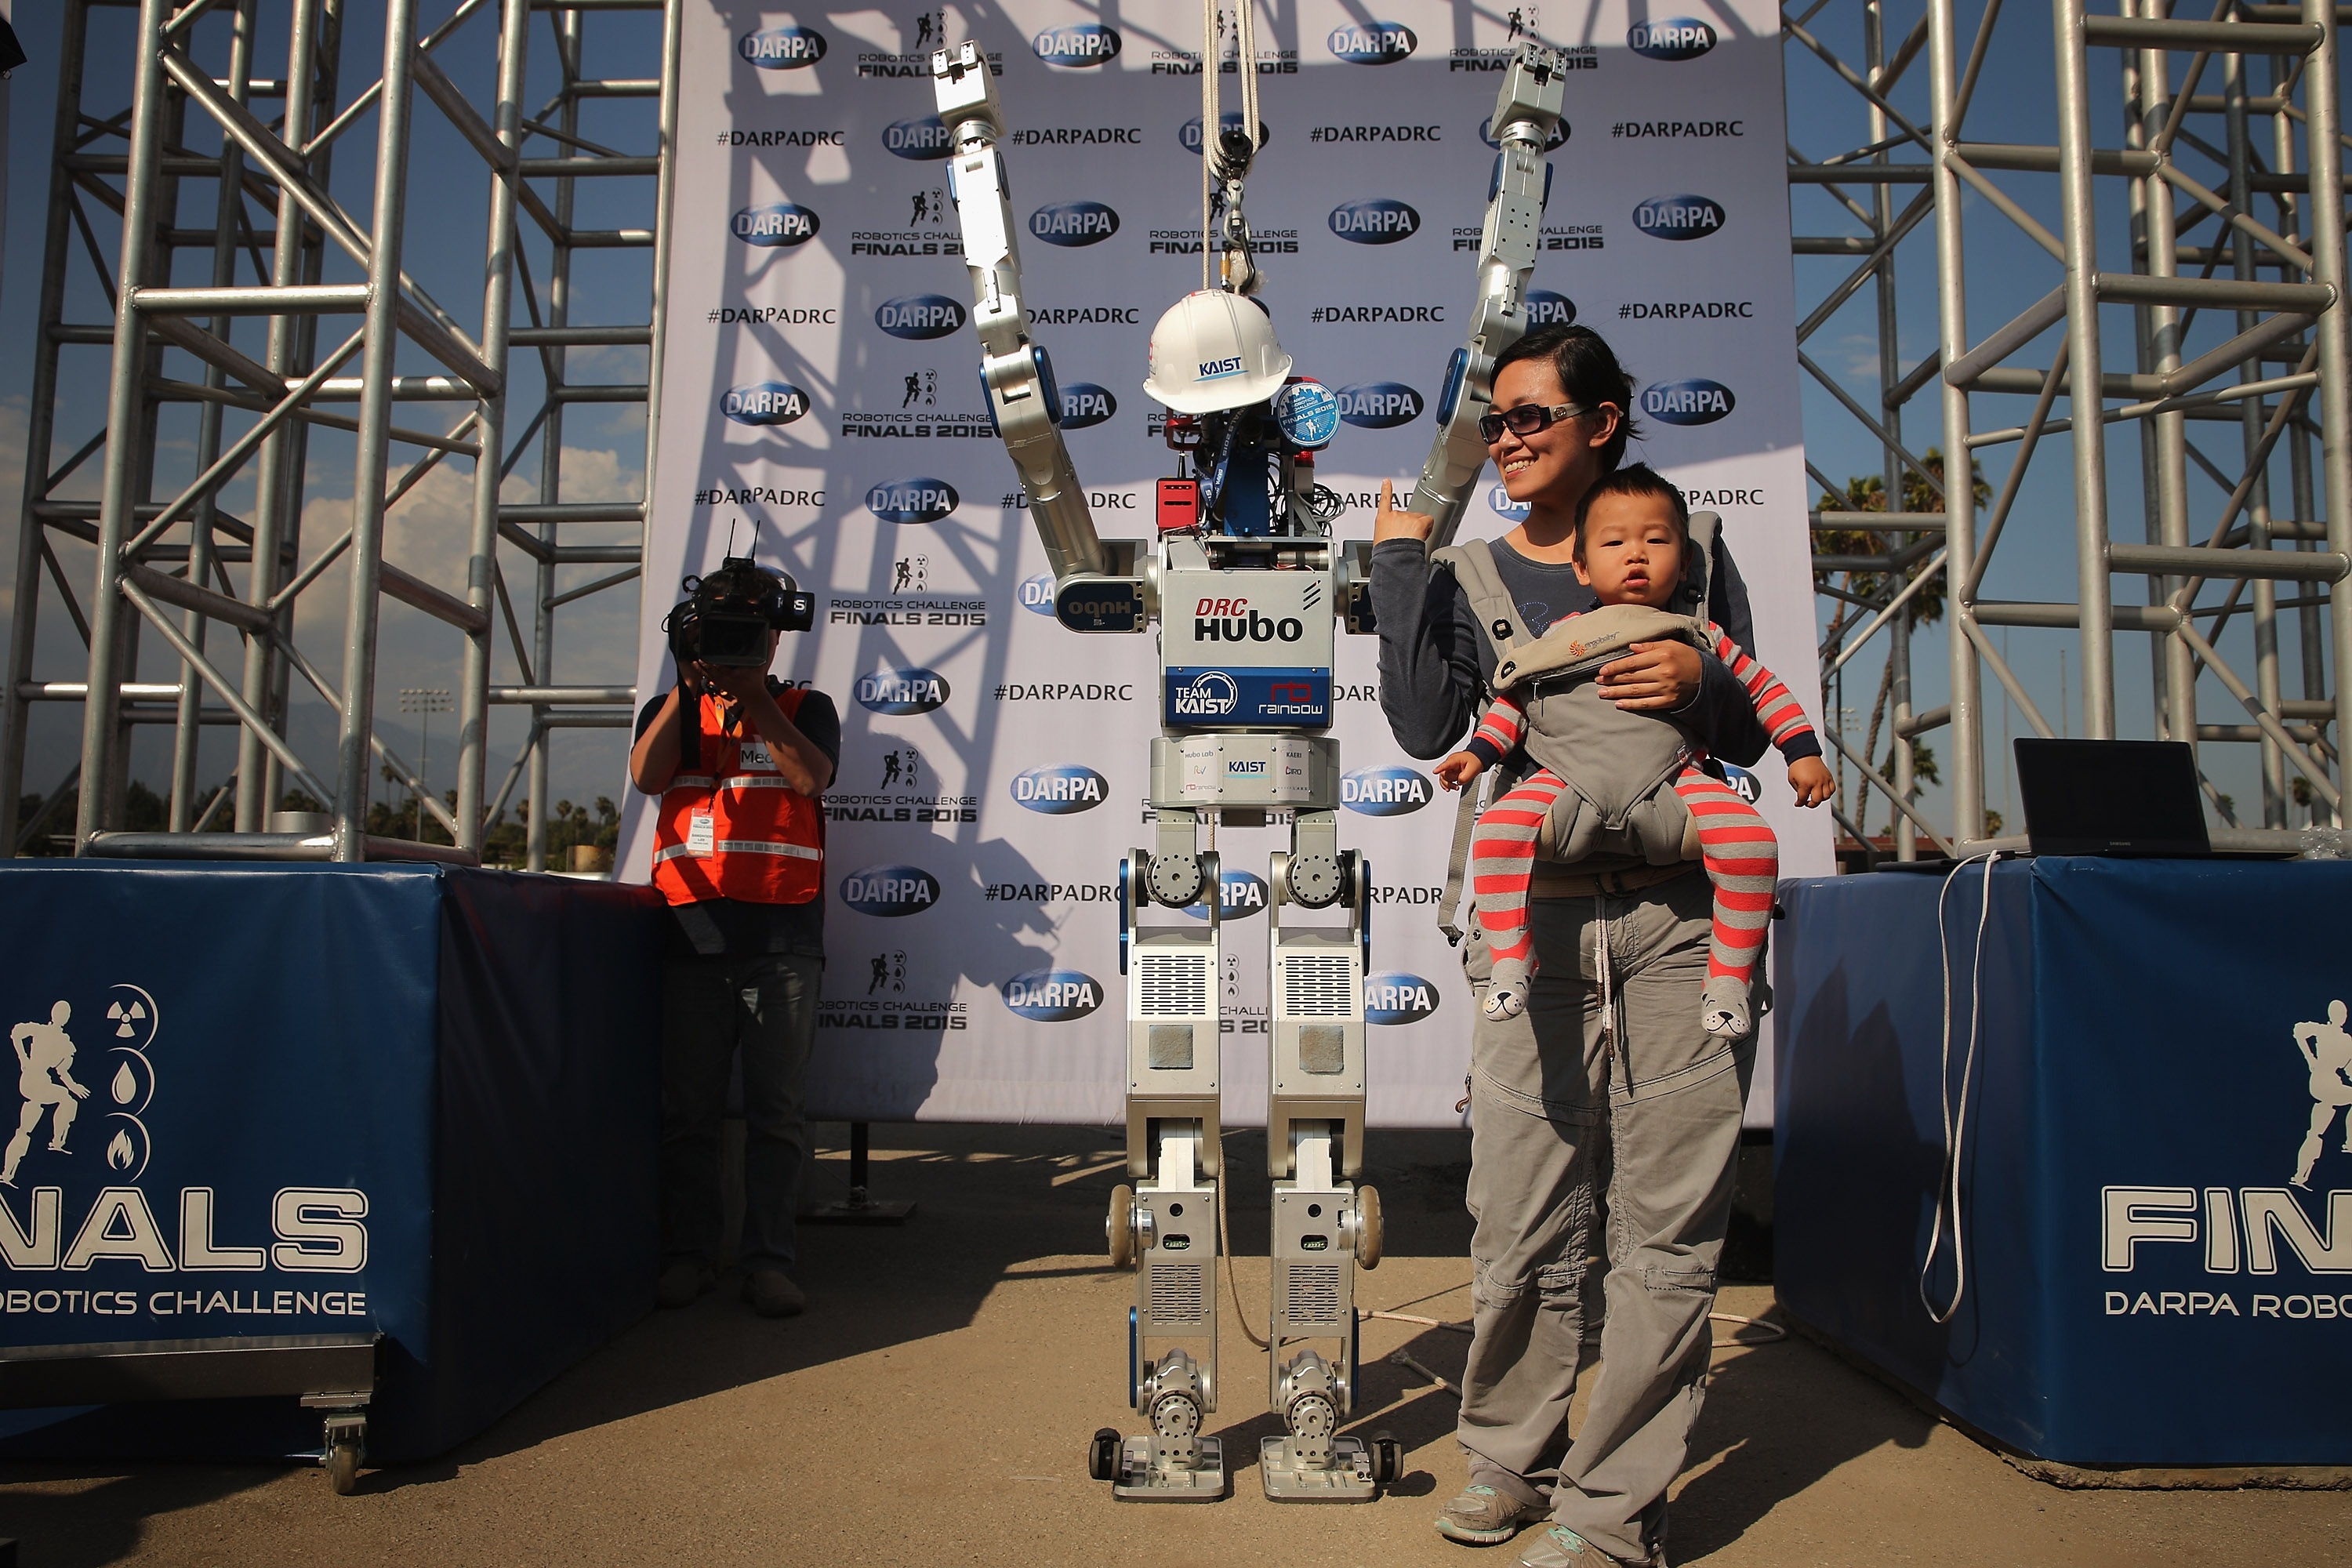 Fans pose for photographs with Team Kaist's DRC-HUBO robot after its successful run during the Defense Advanced Research Projects Agency (DARPA) Robotics Challenge at the Fairplex June 6, 2015 in Pomona, California. (Chip Somodevilla—Getty Images)